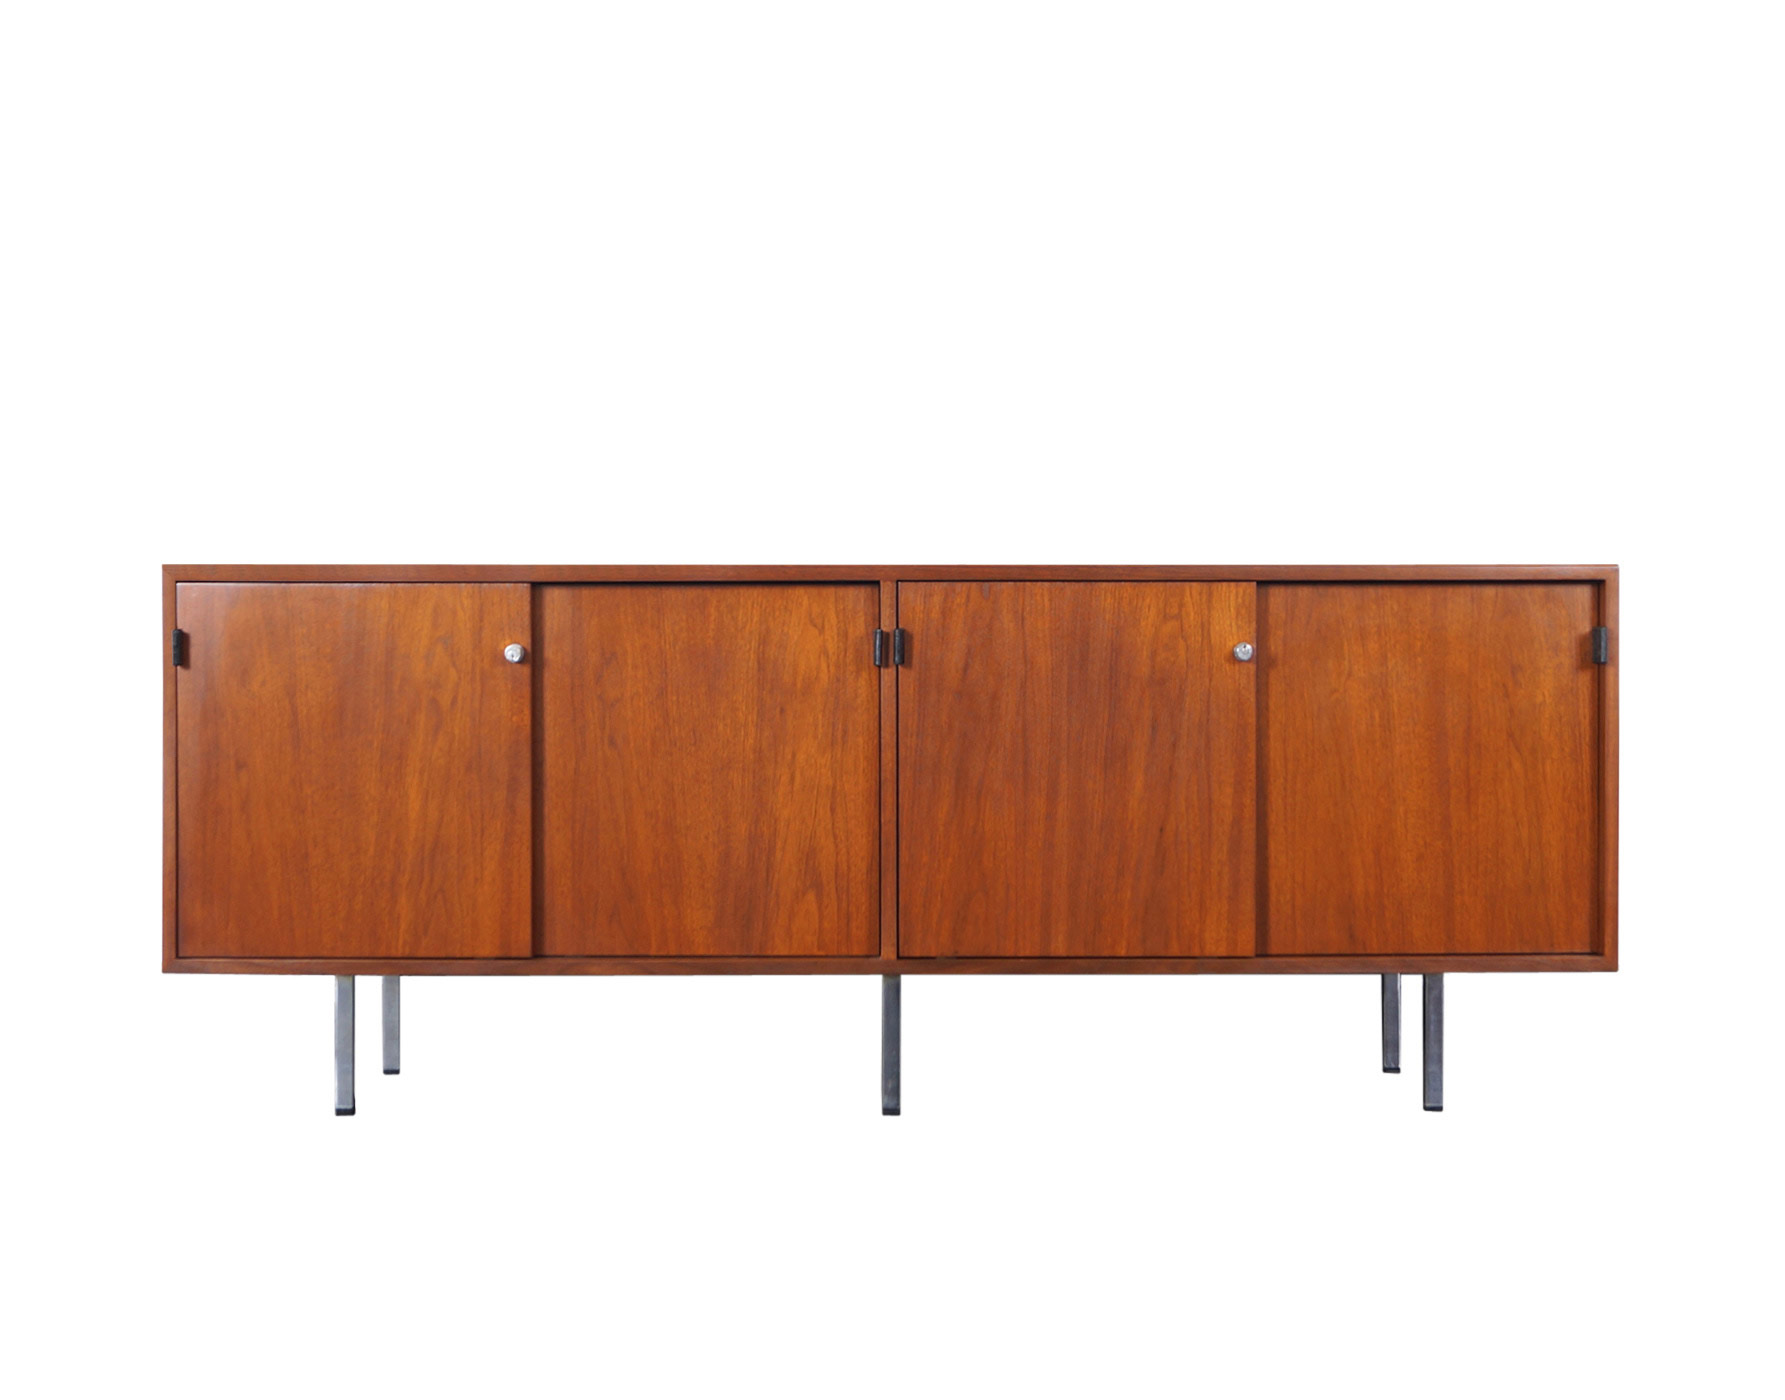 Vintage Walnut Credenza by Florence Knoll